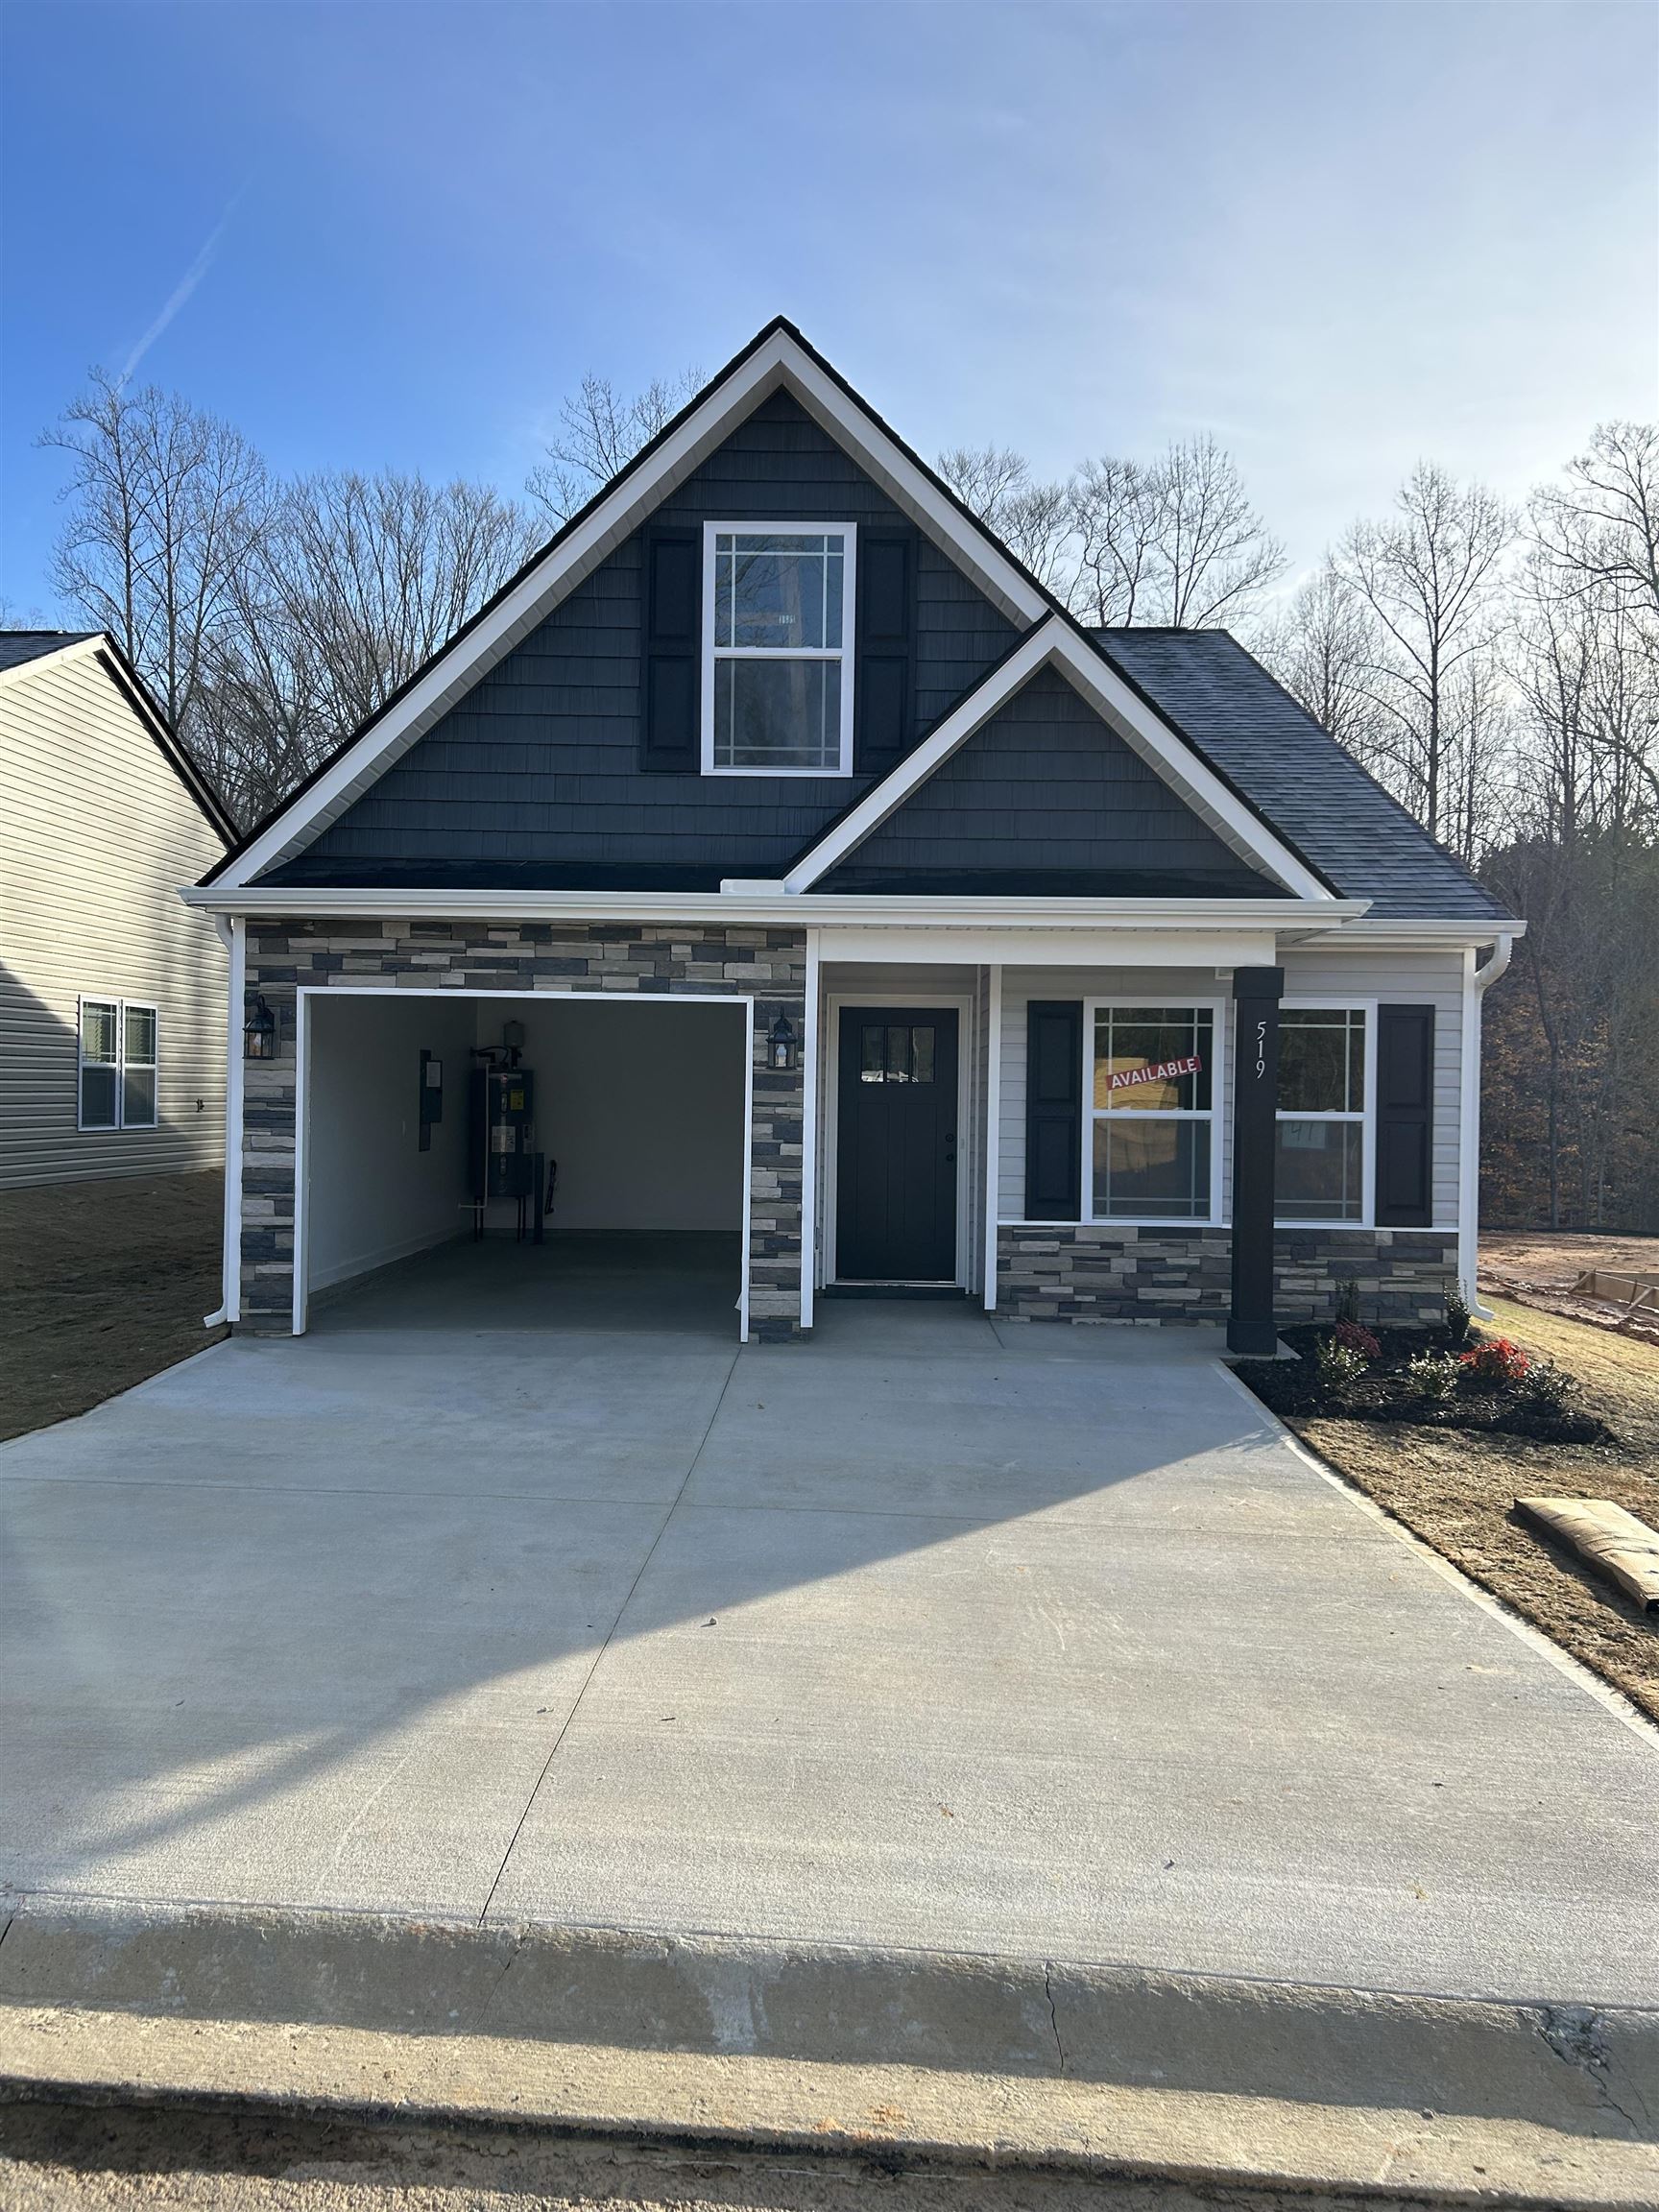 Inman plan - 1165 SF - 2 BR/ 2 BA home with a one car garage. Tall ceilings in the open living area. Kitchen features a large island, custom quartz countertops and Marsh cabinets. A covered back patio is great for entertaining. Lot 41. Home ready to close in early 2023.